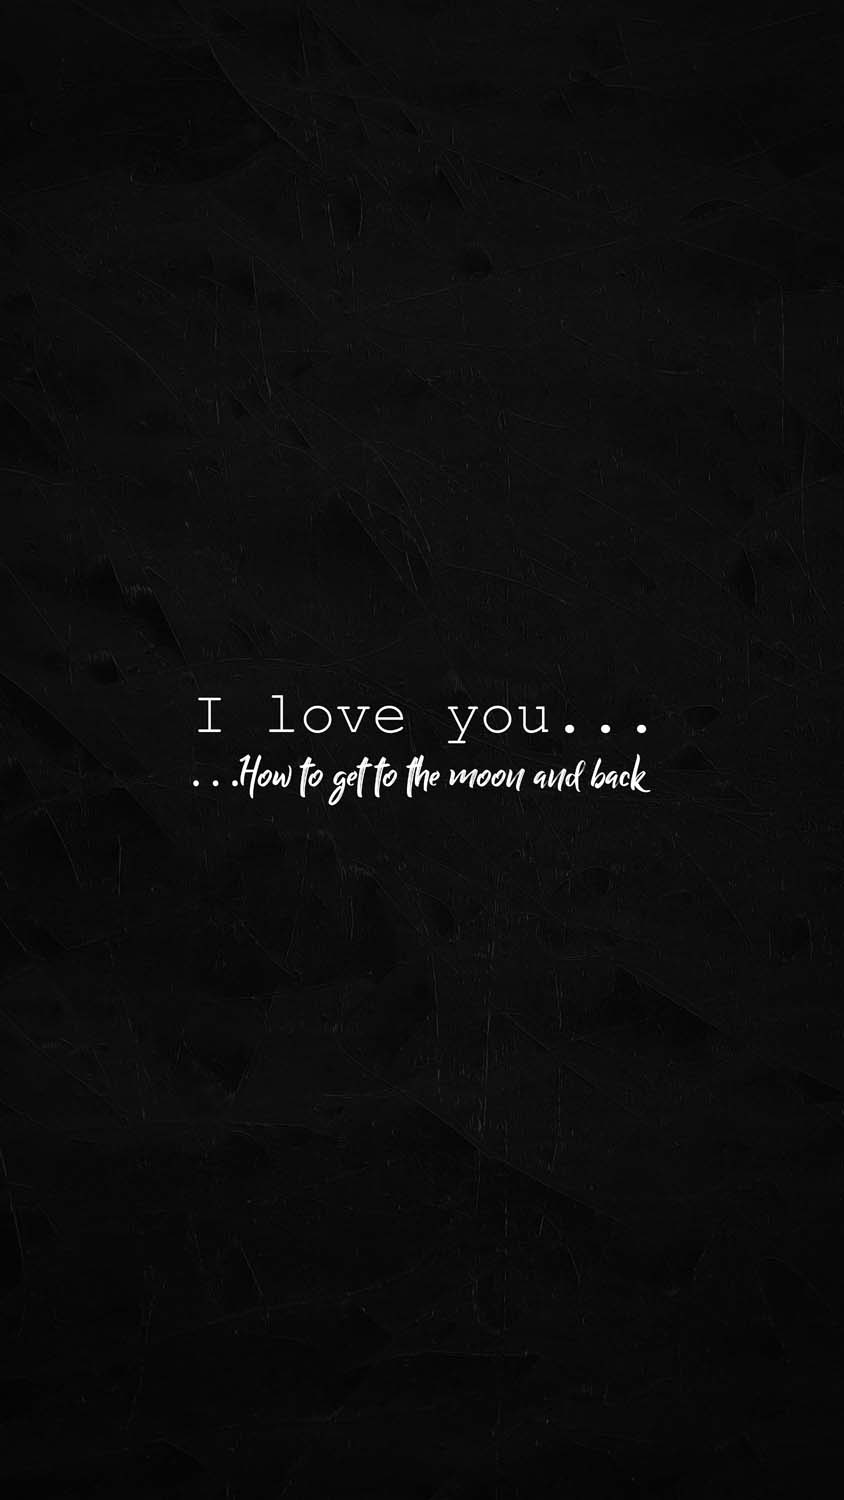 I Love You But IPhone Wallpaper HD  IPhone Wallpapers